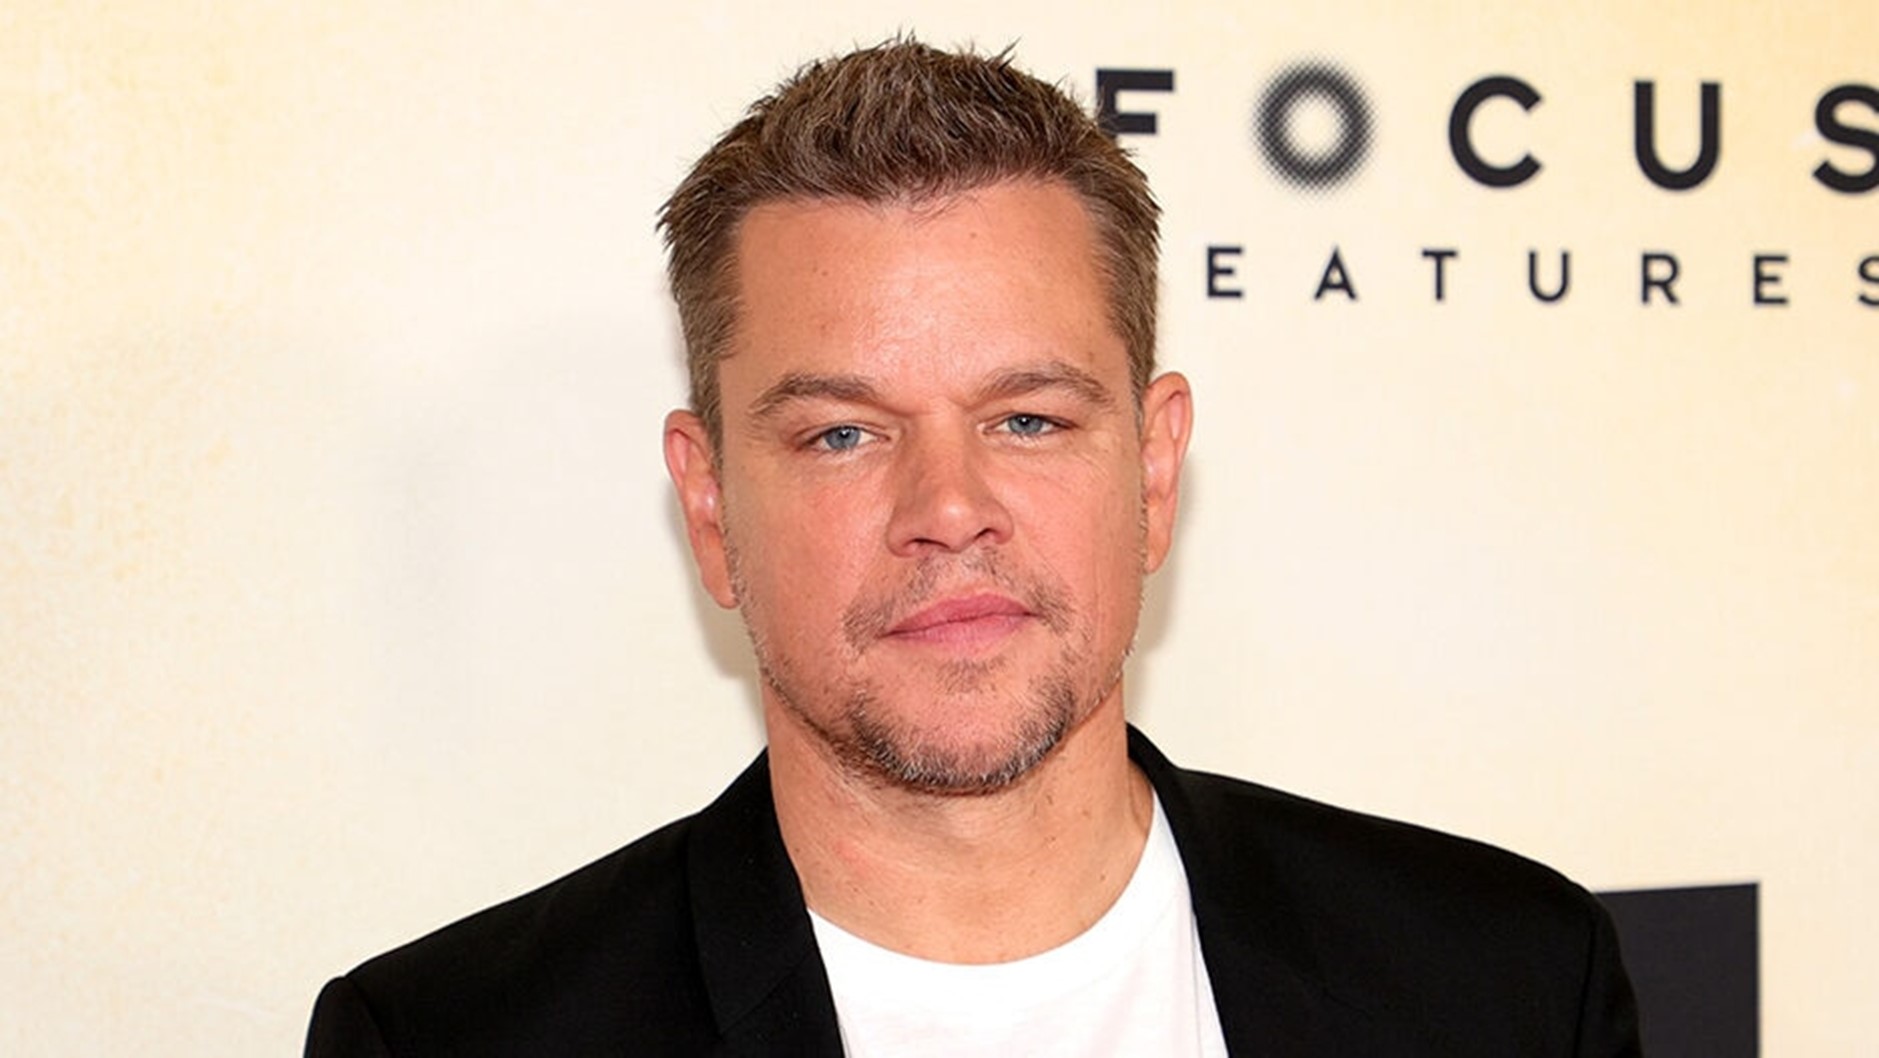 Matt Damon Net Worth: How much cash does the A-lister have?